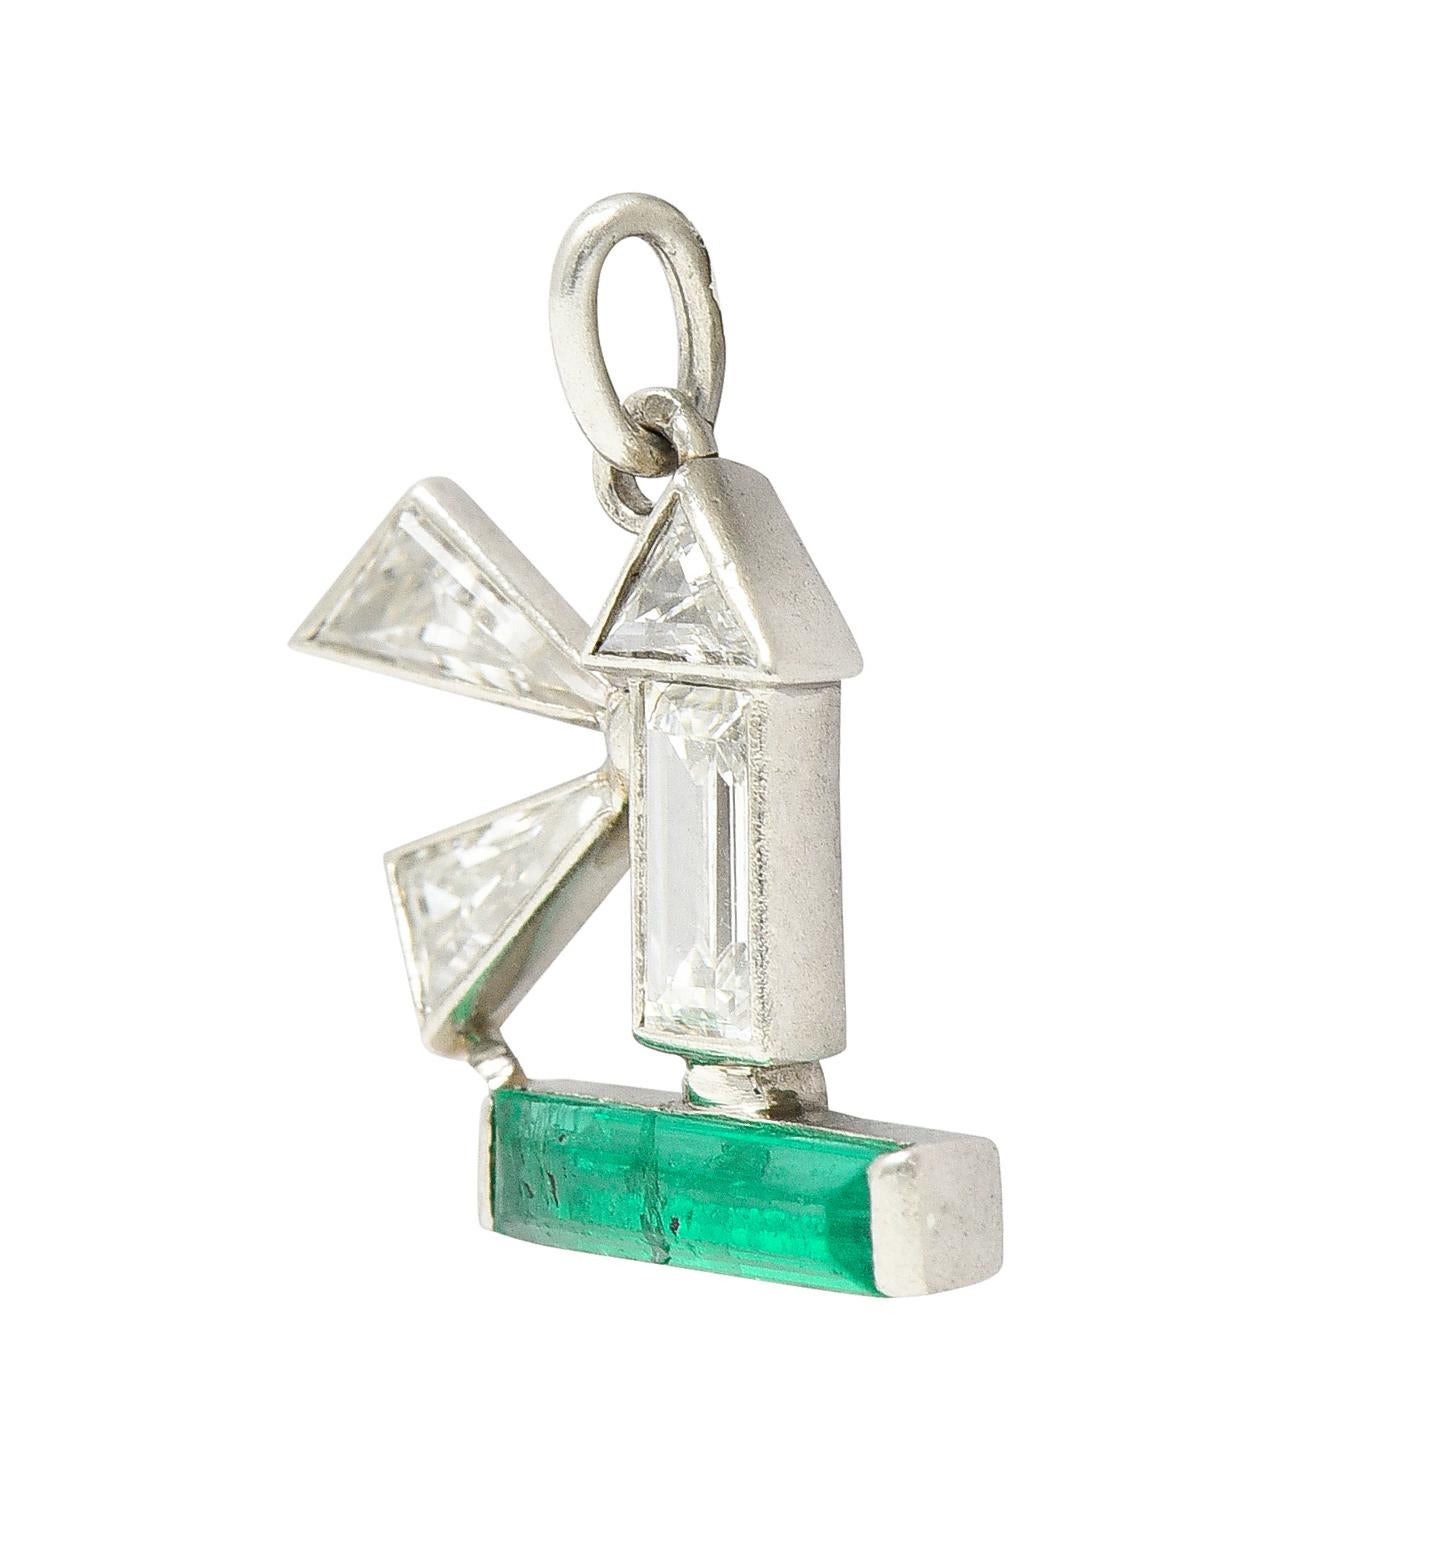 Designed as a stylized geometric lighthouse. With bezel set diamonds of varying cuts. Weighing approximately 0.40 carat total. Quality consistent with cut and age. With a bar set emerald baguette. Weighing approximately 0.20 carat total. Transparent